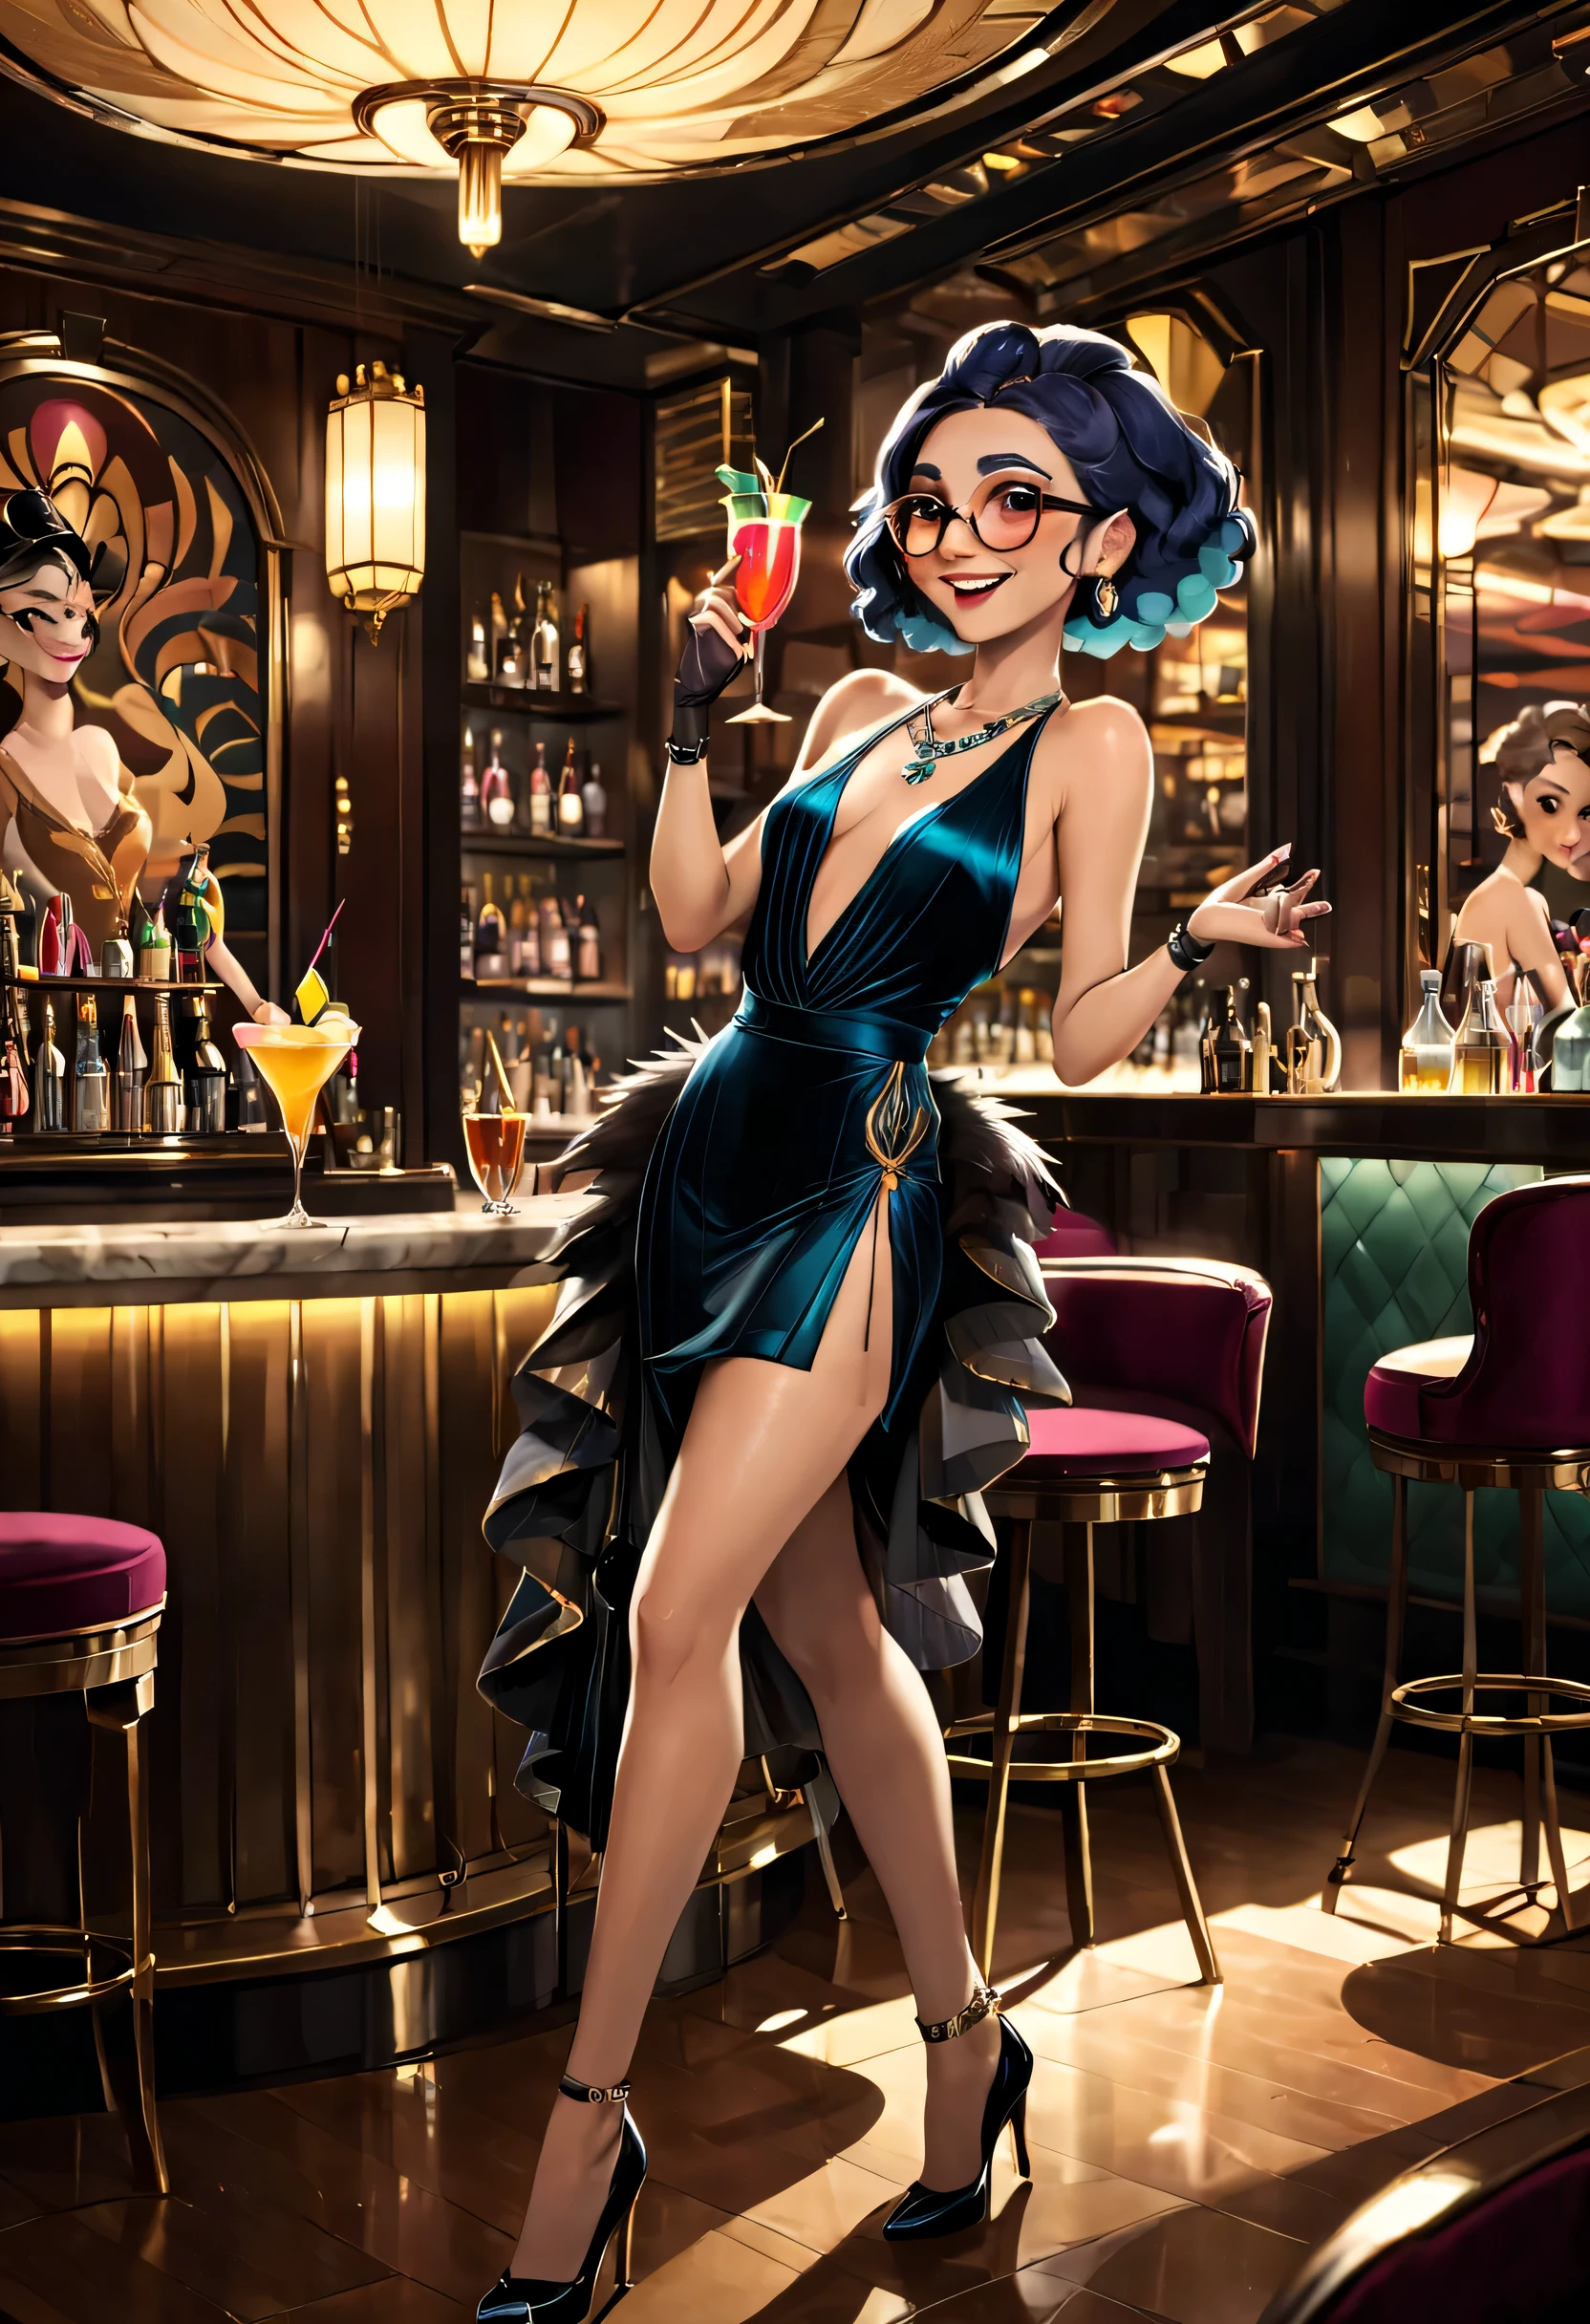 a girl/man with 3 trolls in an art deco bar, luxurious interior design, dimly lit room, vintage furnishings, velvet armchairs, marble bar counter, ornate chandeliers, art deco patterns, elaborate ceiling decorations, extravagant cocktails, jazz music, 1920s atmosphere, smoky ambiance, gold accents, polished wooden floors, extravagant outfits, troll's mischievous expressions, lively conversations, clinking glasses, laughter, vibrant color palette, mysterious atmosphere